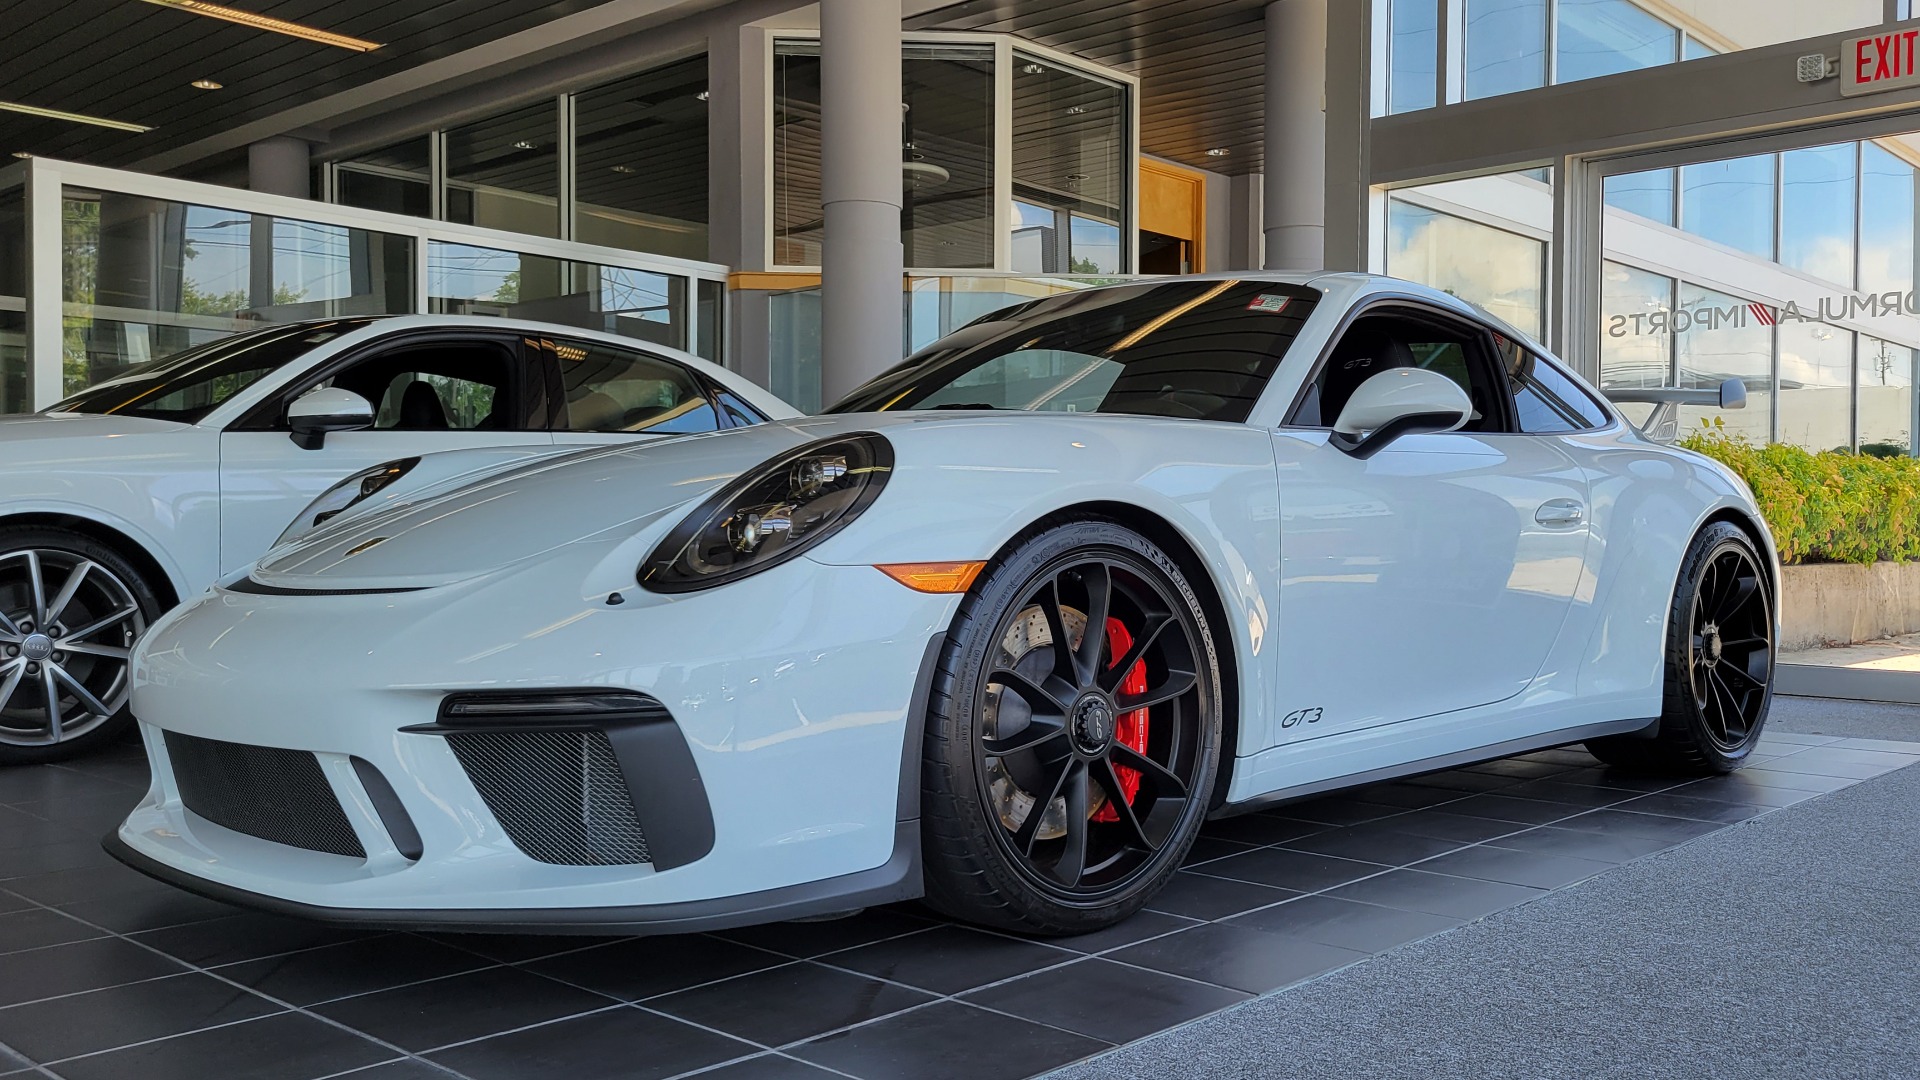 Used 2019 Porsche 911 GT3 4.0L 520HP COUPE / PDK 7-SPD / BOSE / APPLE / REARVIEW for sale $203,995 at Formula Imports in Charlotte NC 28227 2